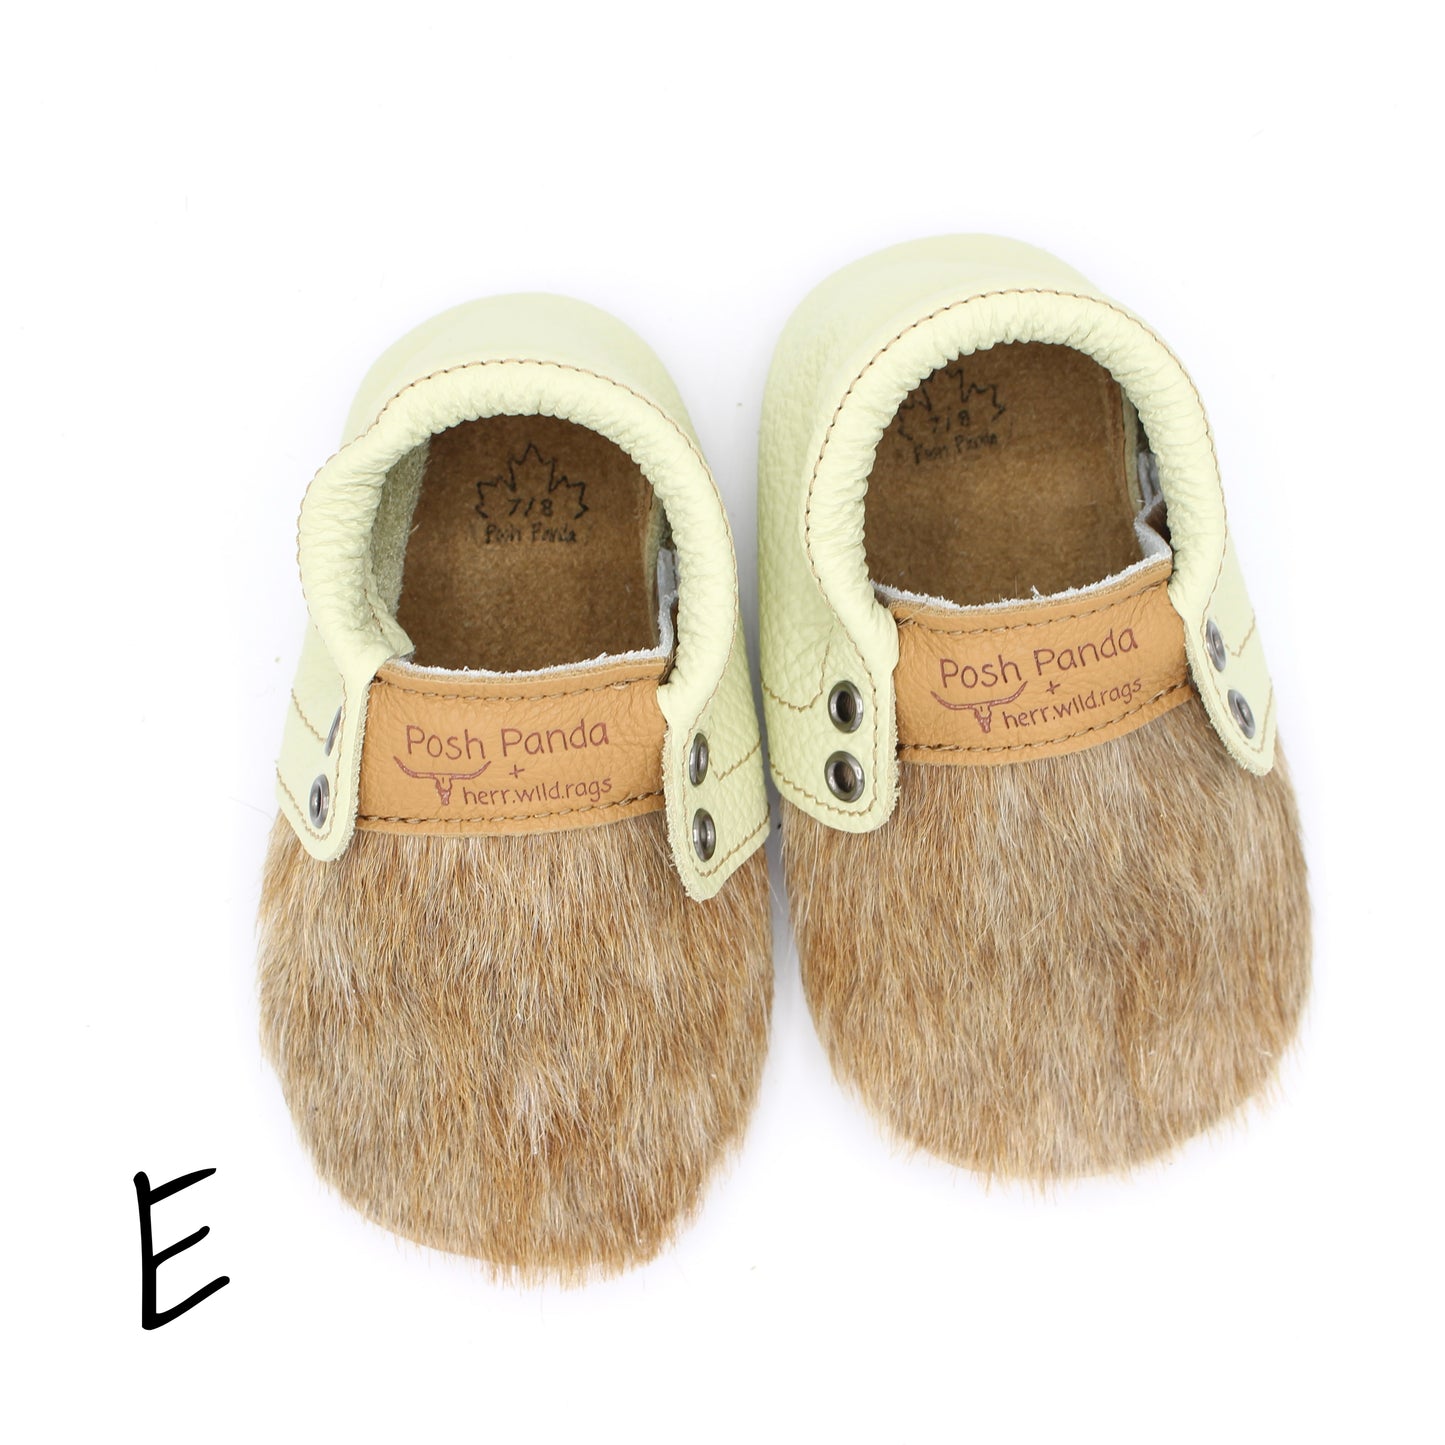 Hair Hide Mocs -  BABY/TODDLER (Soft Sole) - Size 7/8